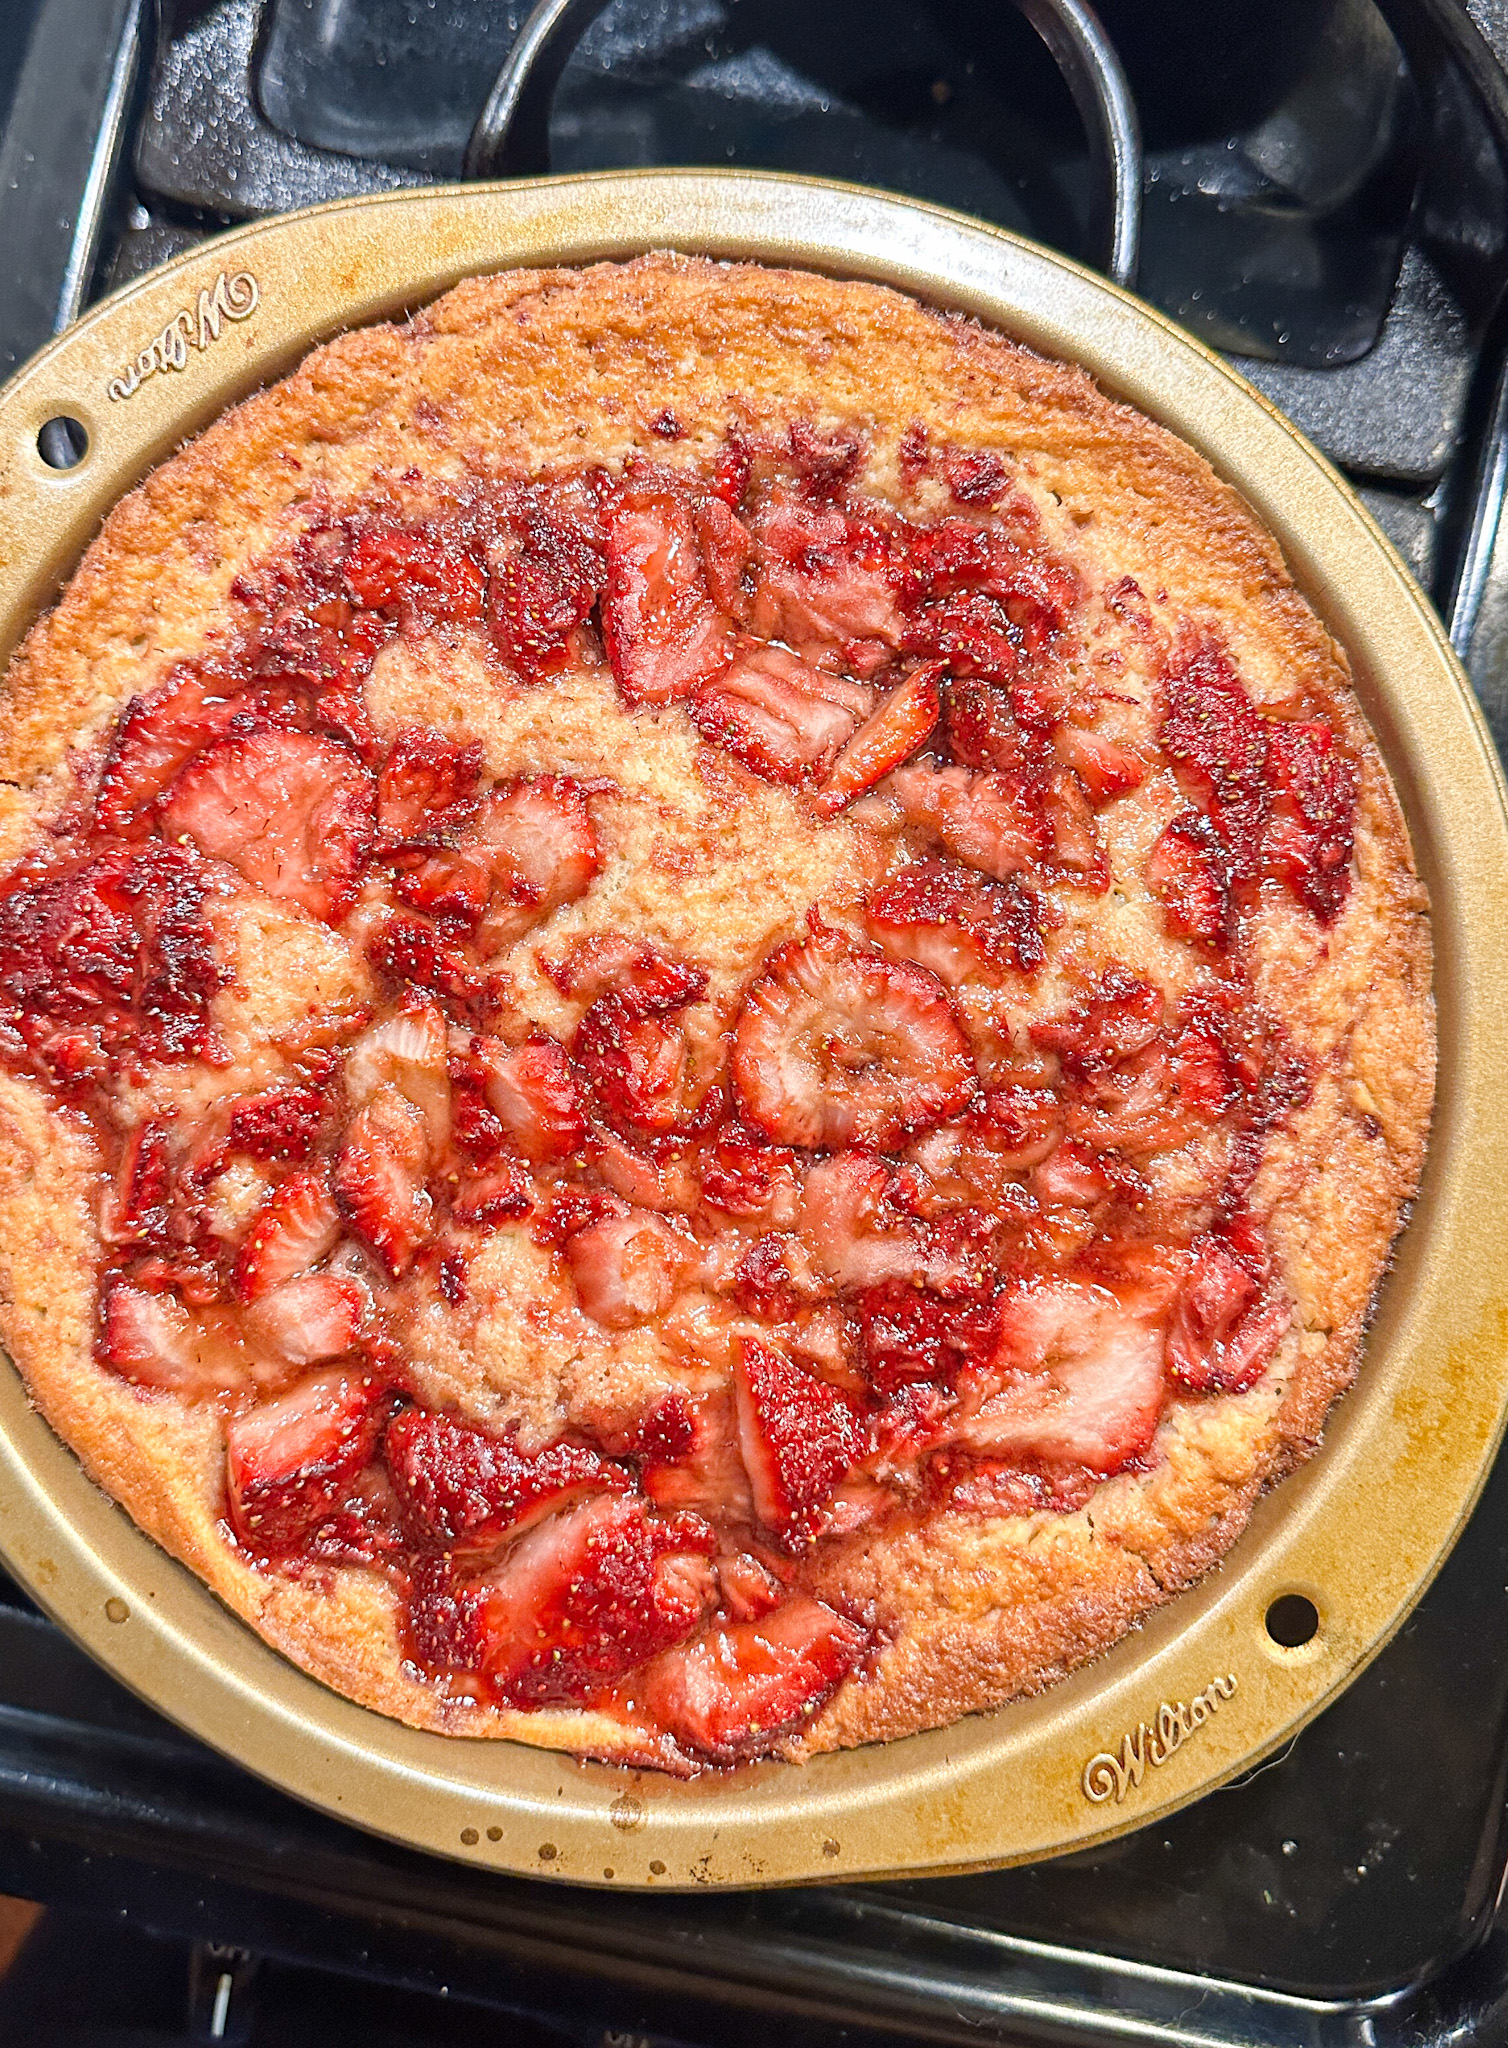 Strawberry pie with a golden-brown crust on a stove